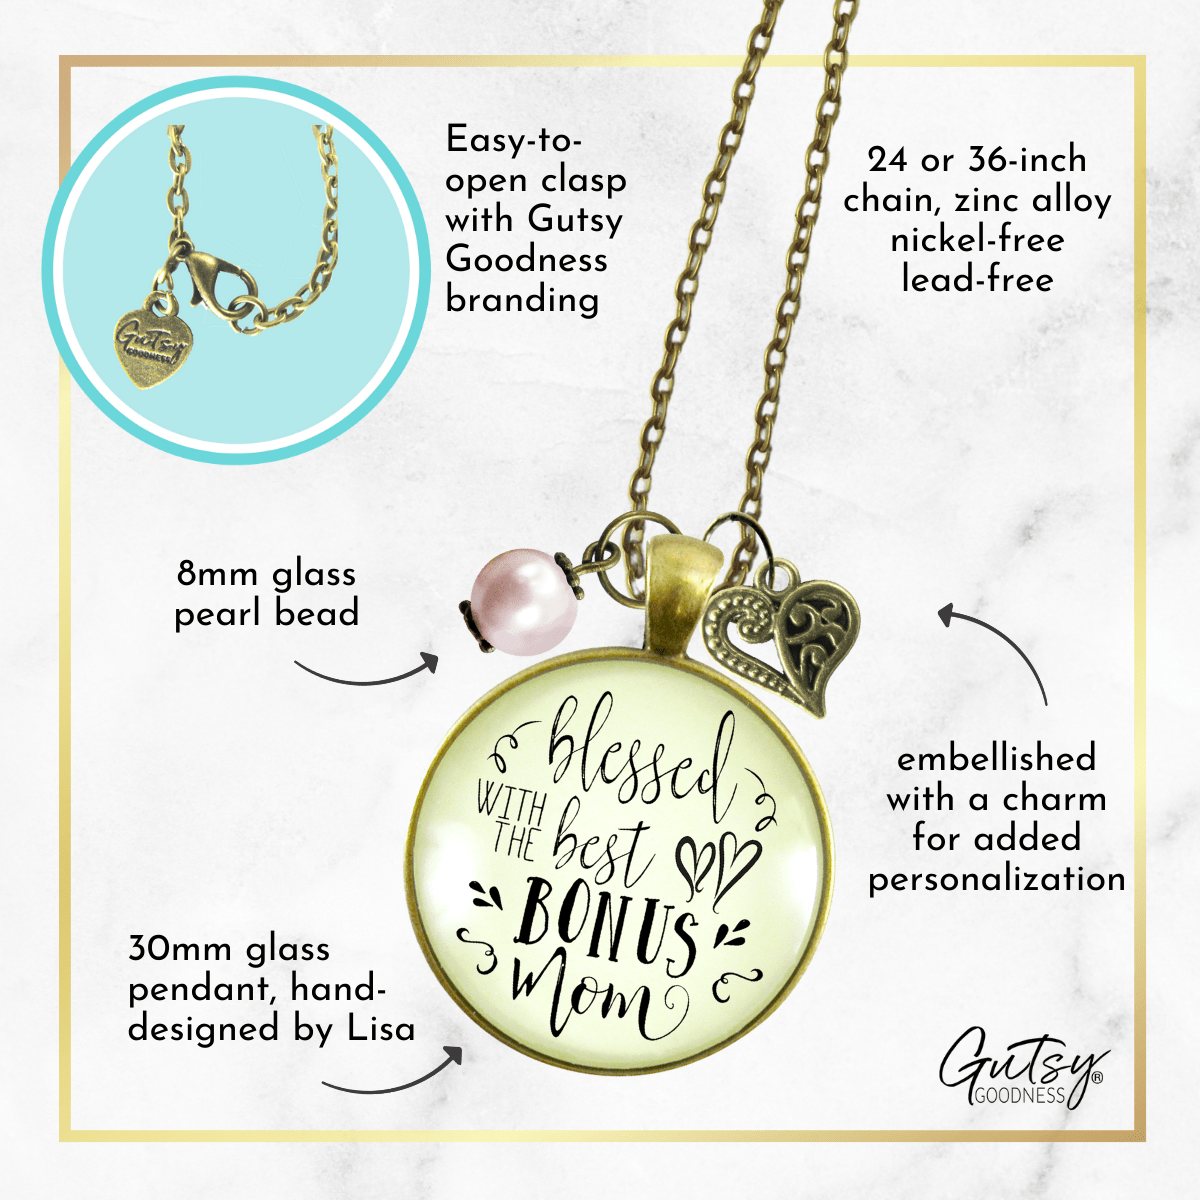 Gutsy Goodness Blessed with Best Bonus Mom Necklace Thank You Mother Womens Jewelry Gift - Gutsy Goodness;Blessed With Best Bonus Mom Necklace Thank You Mother Womens Jewelry Gift - Gutsy Goodness Handmade Jewelry Gifts